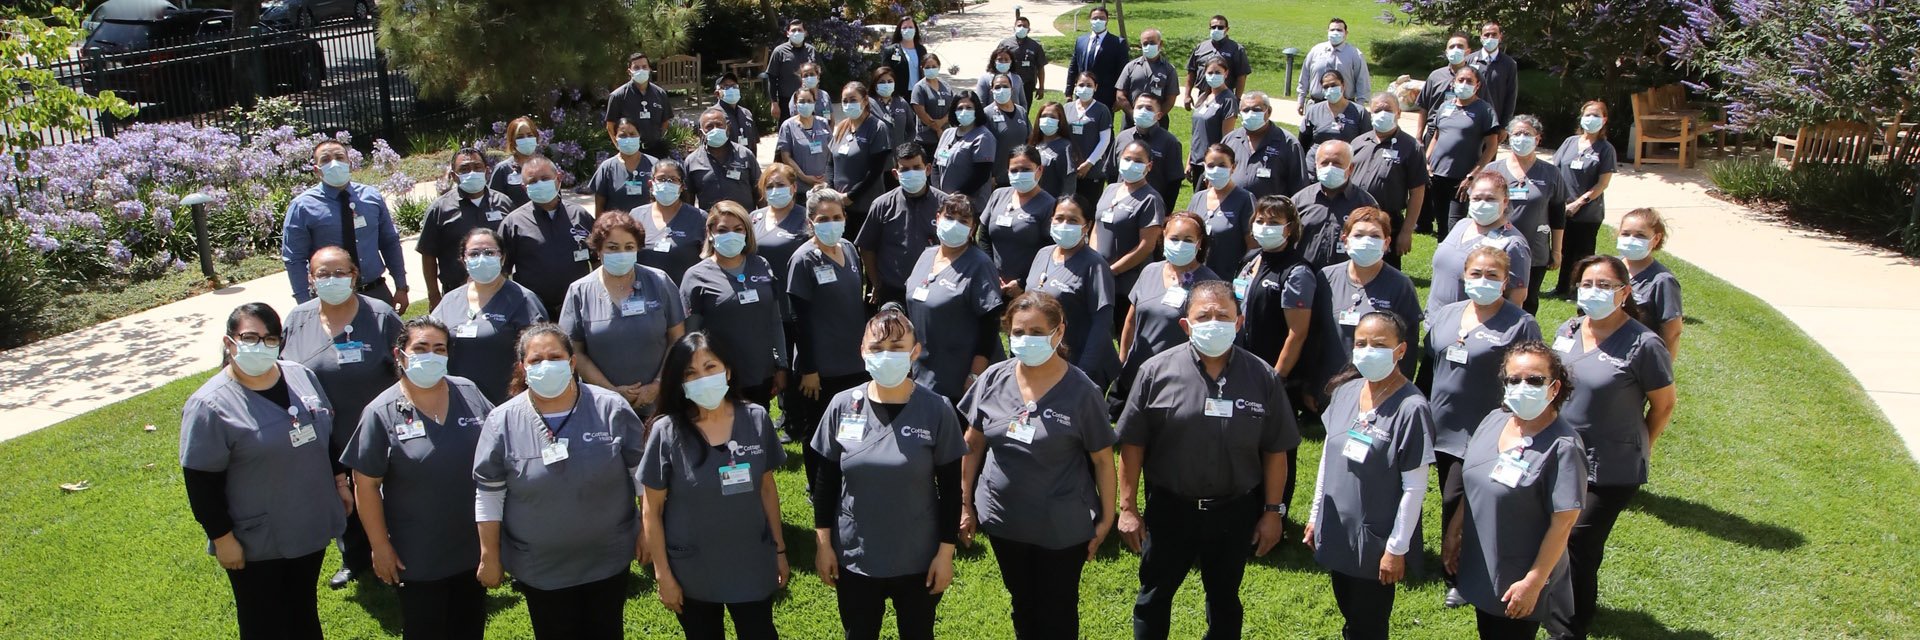 Large group of Environmental Services workers posing for a photo outdoors